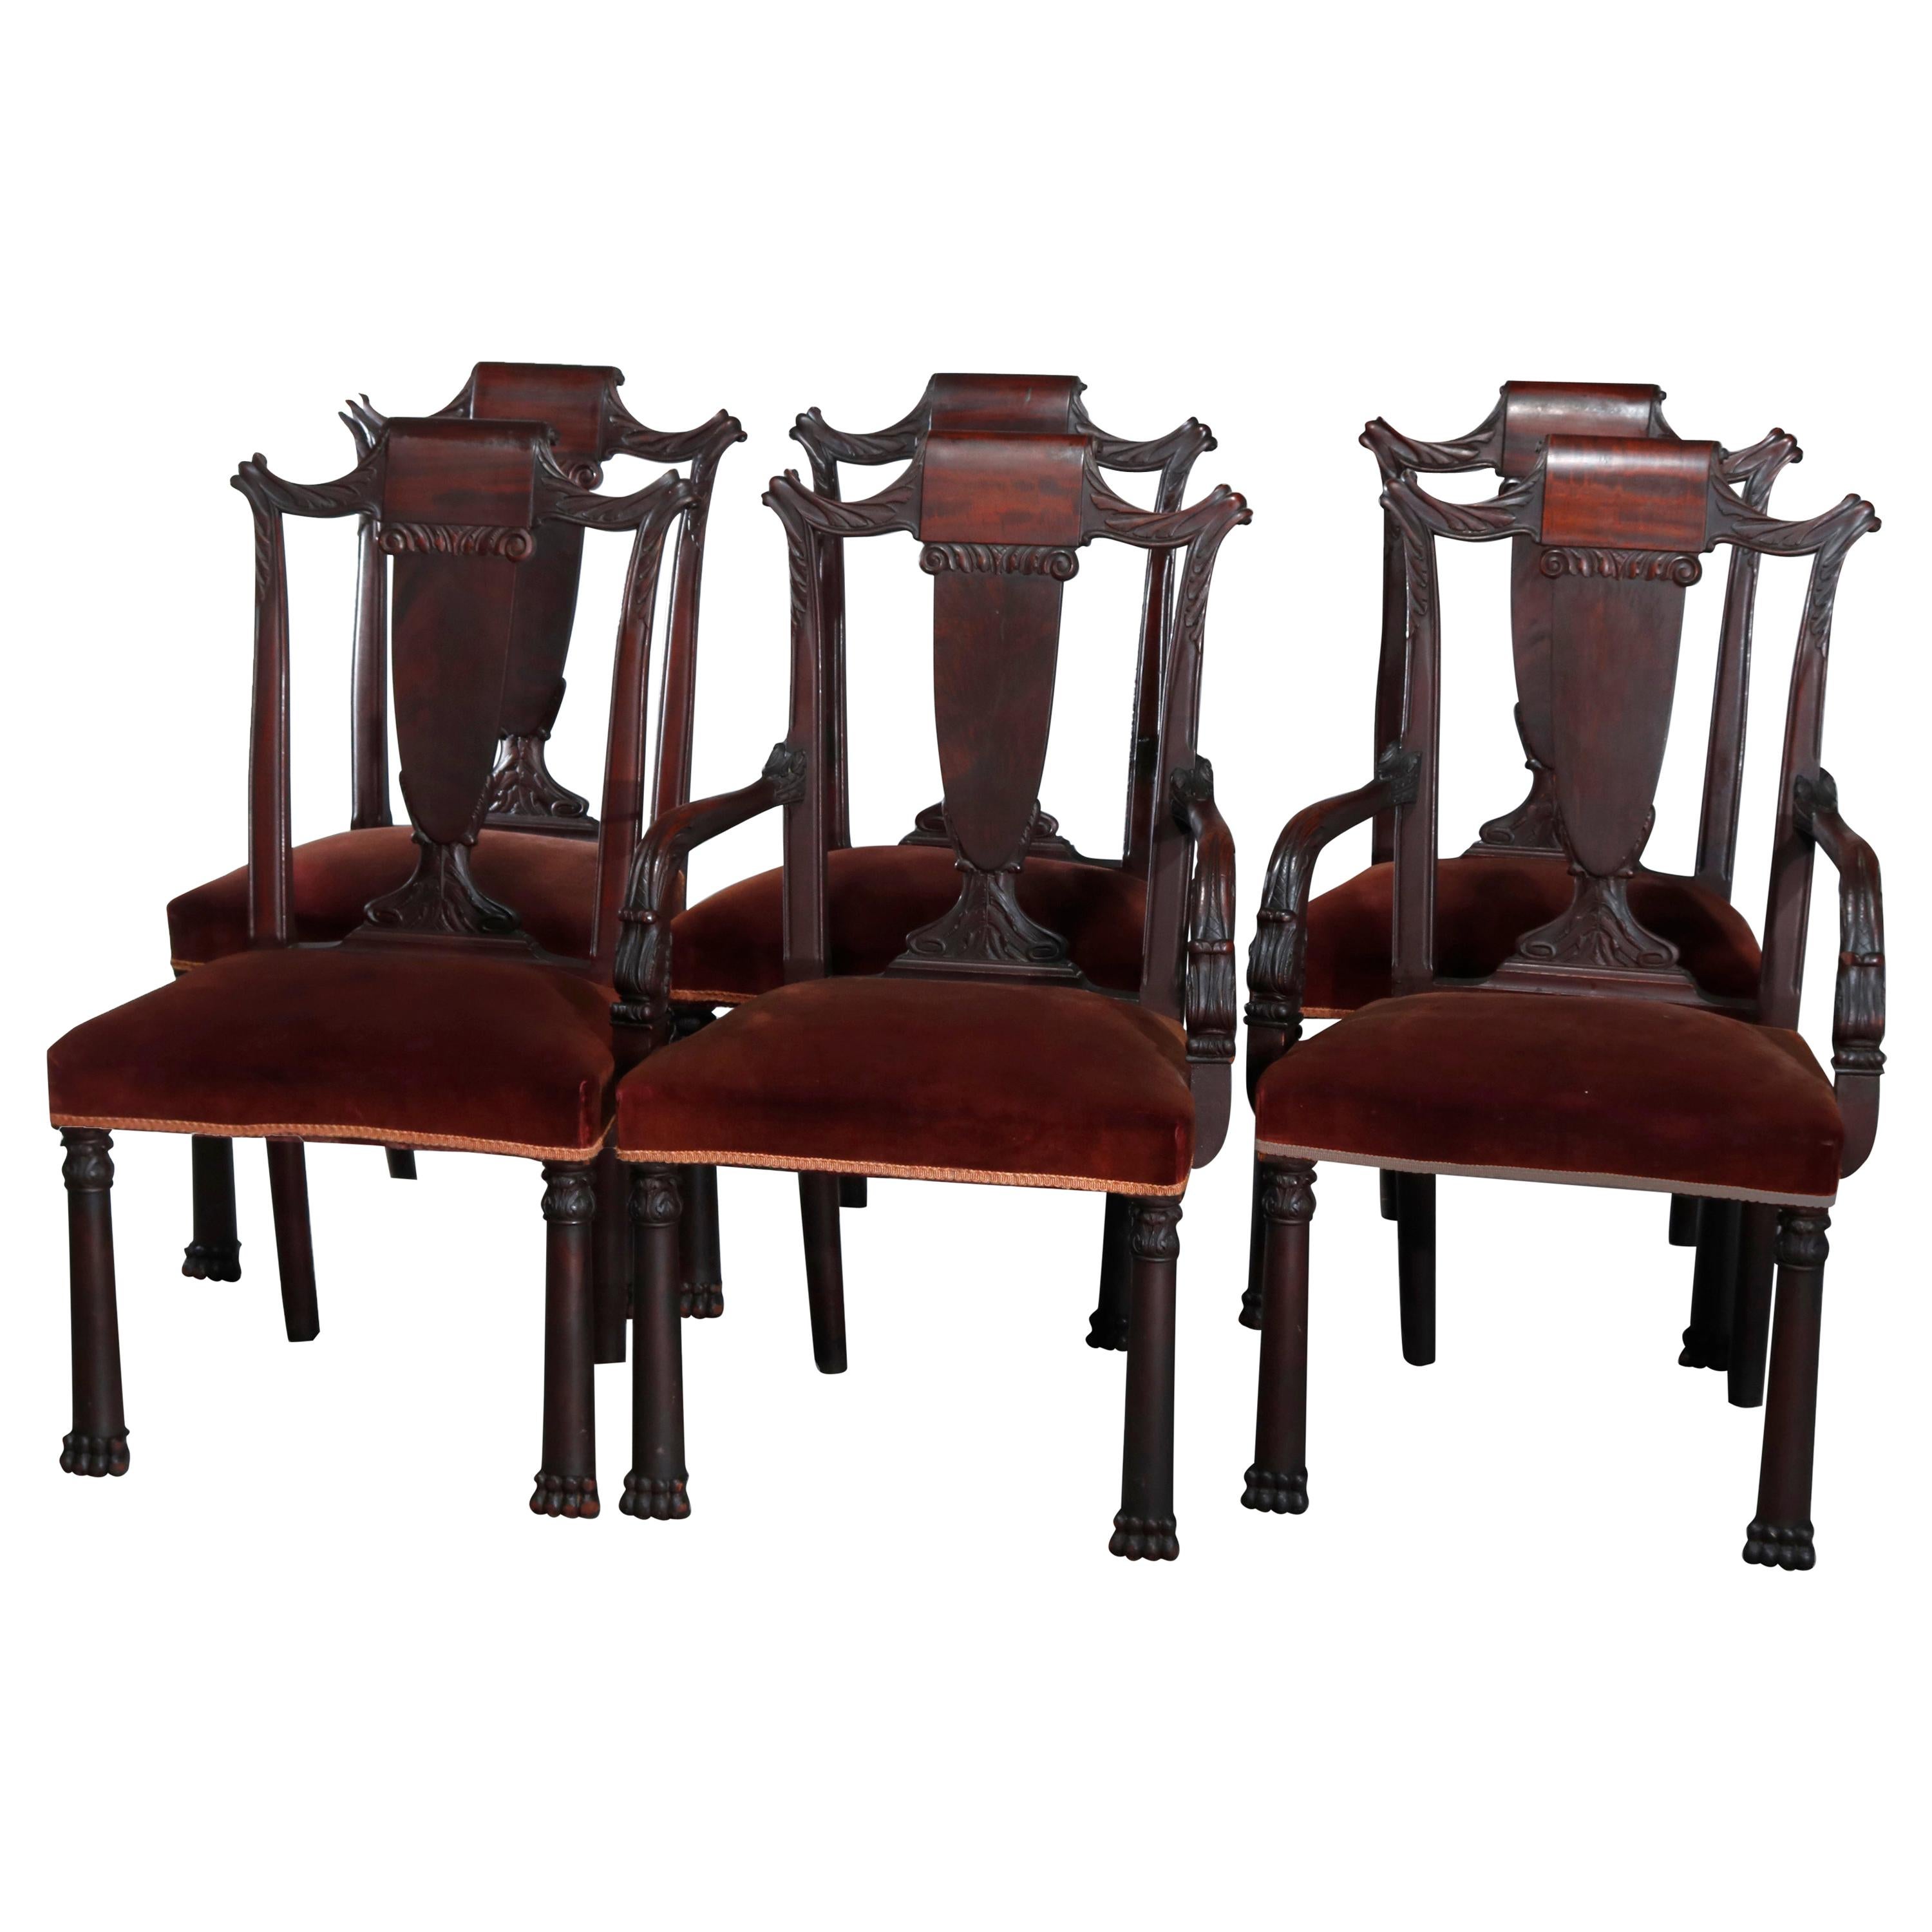 Six Antique Second American Empire Carved Flame Mahogany Dining Chairs